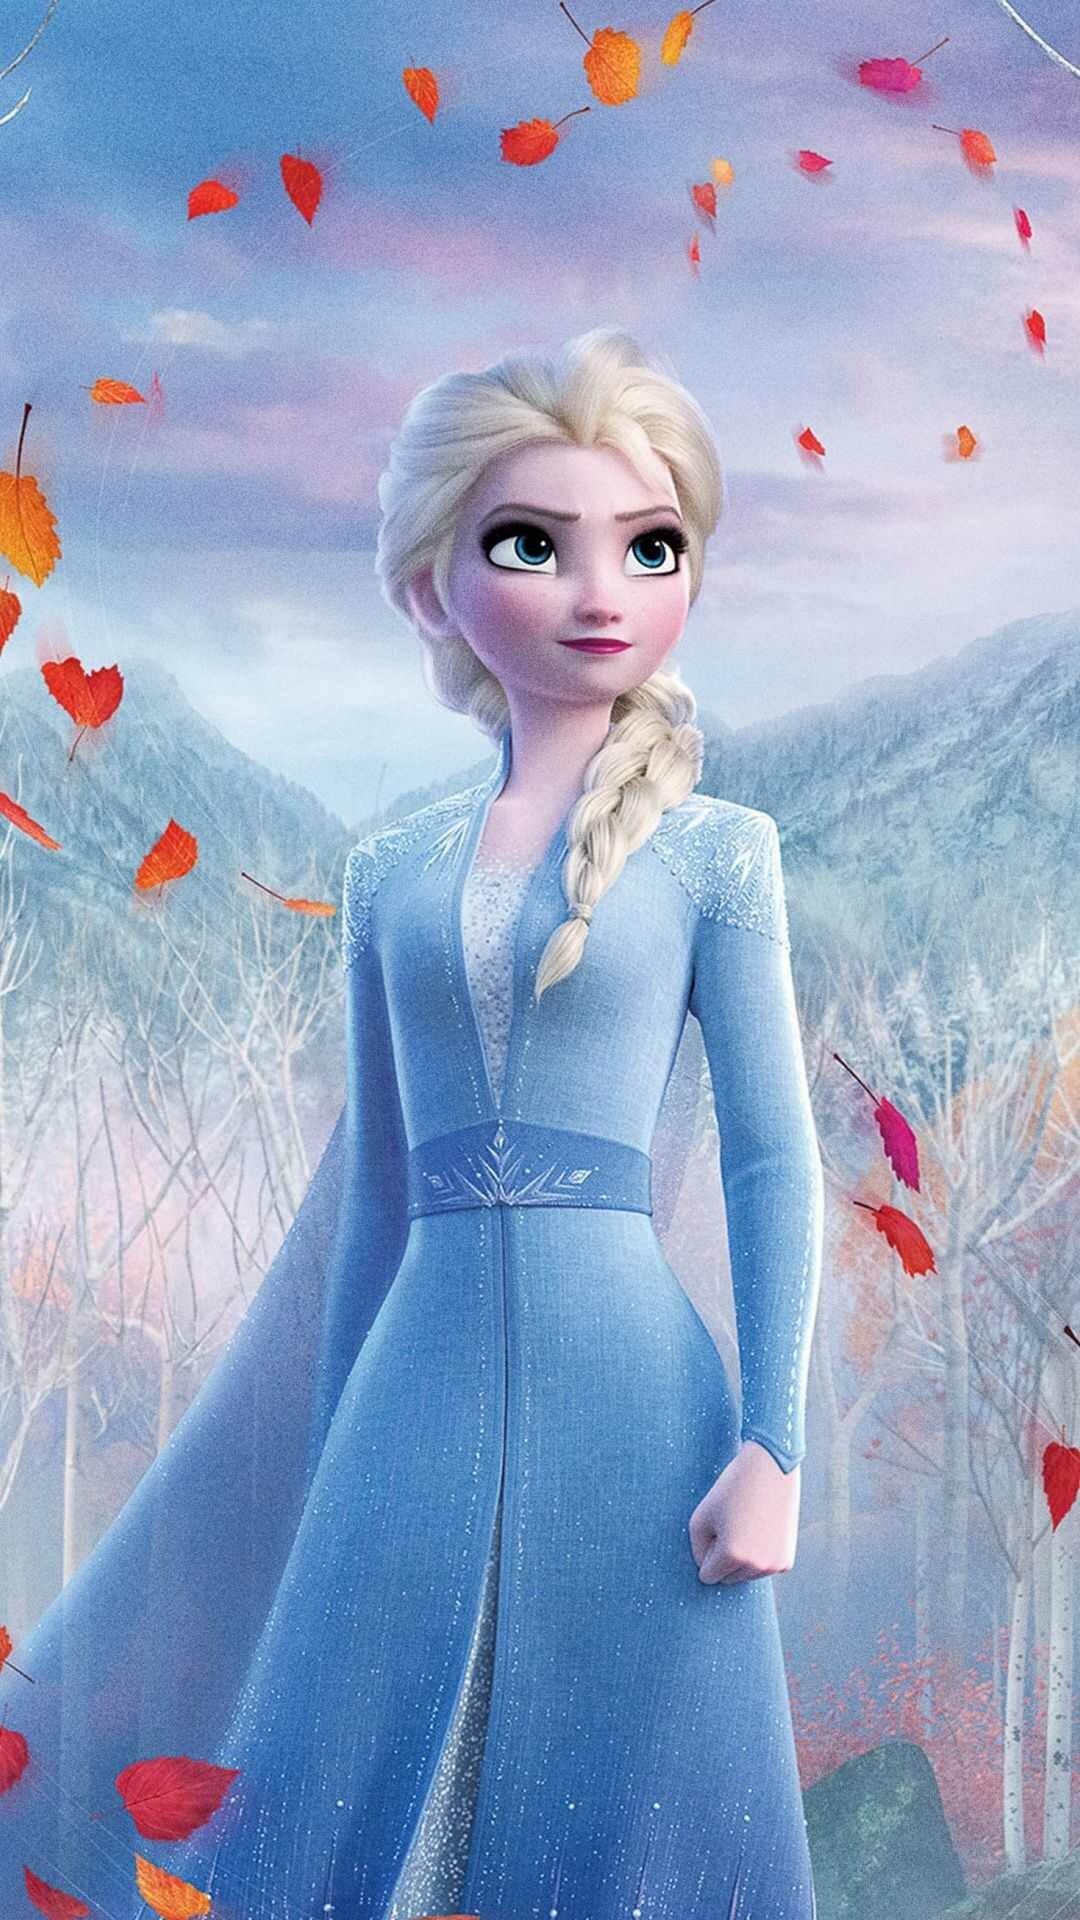 Frozen: On the coronation day, Queen Elsa accidentally freezes the kingdom, runs away far from her kingdom, and leaves it in the cold weather, Anna decides to overcome the snowstorm to find Elsa and hopes that her sister can withdraw magic. 1080x1920 Full HD Background.